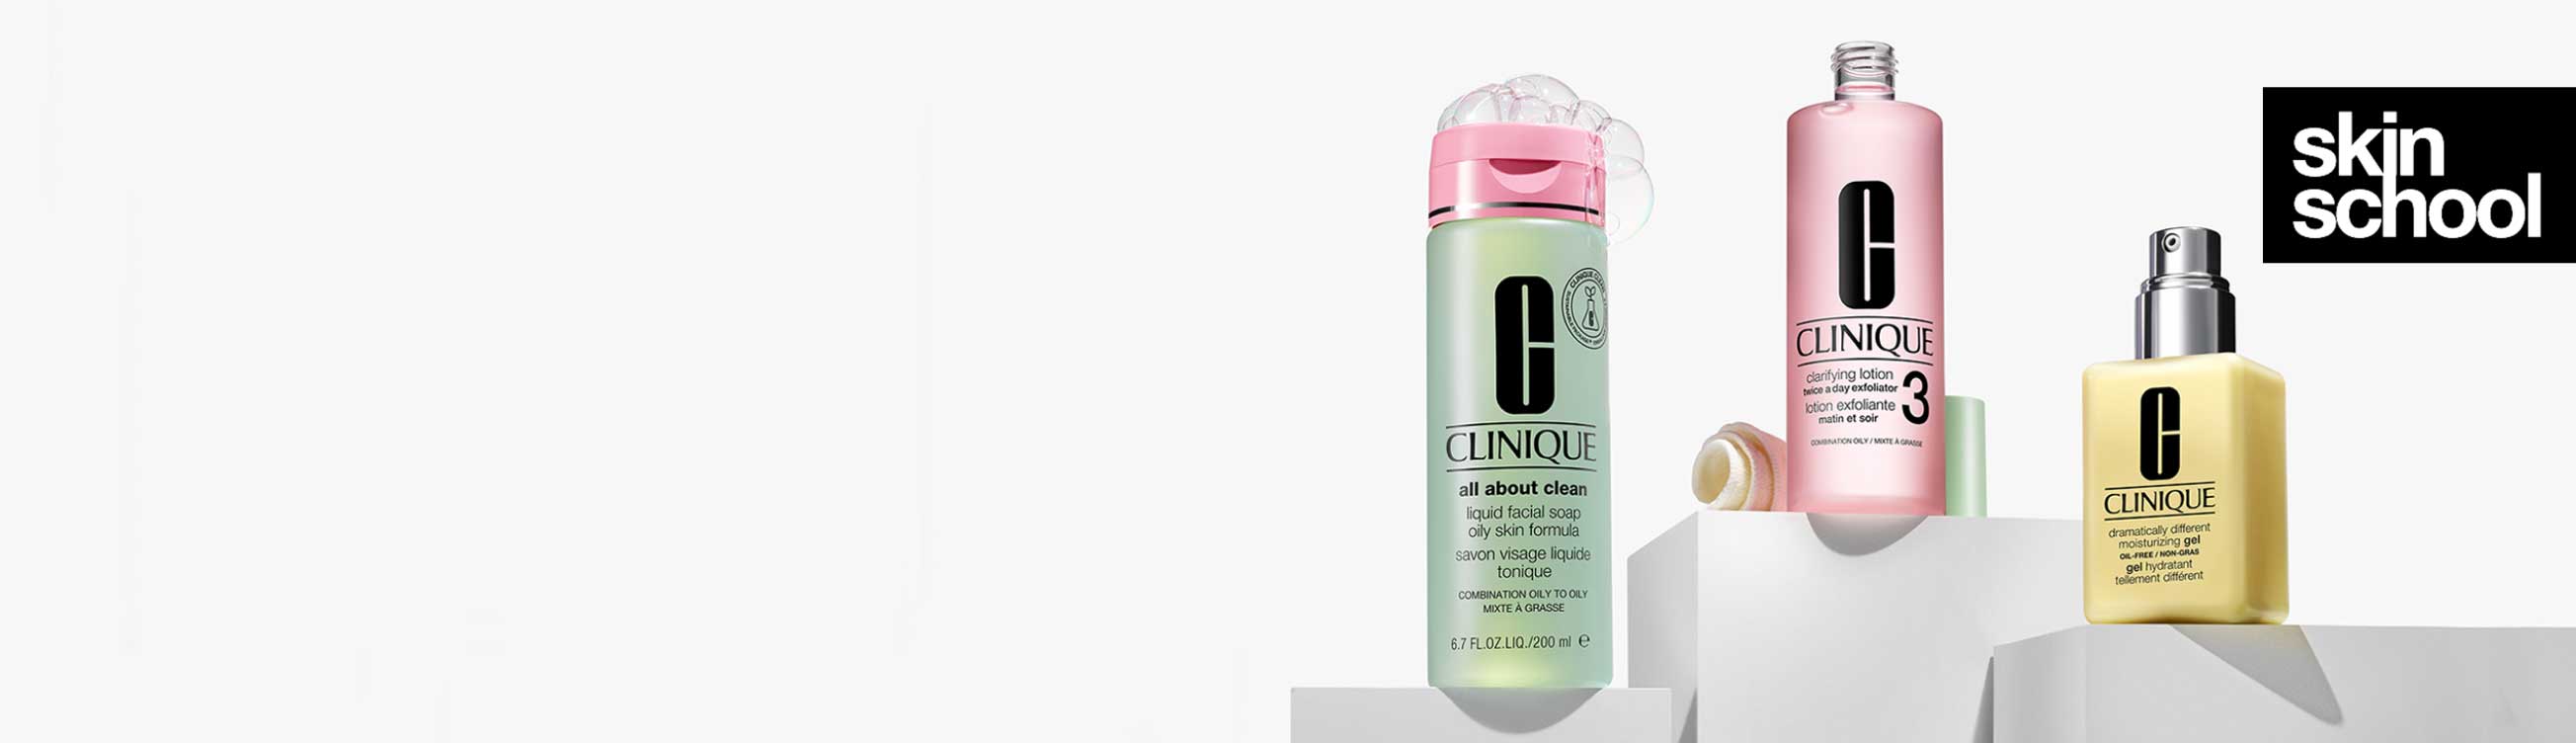 Dramatically Moisturizing | Clinique Different™ Lotion+